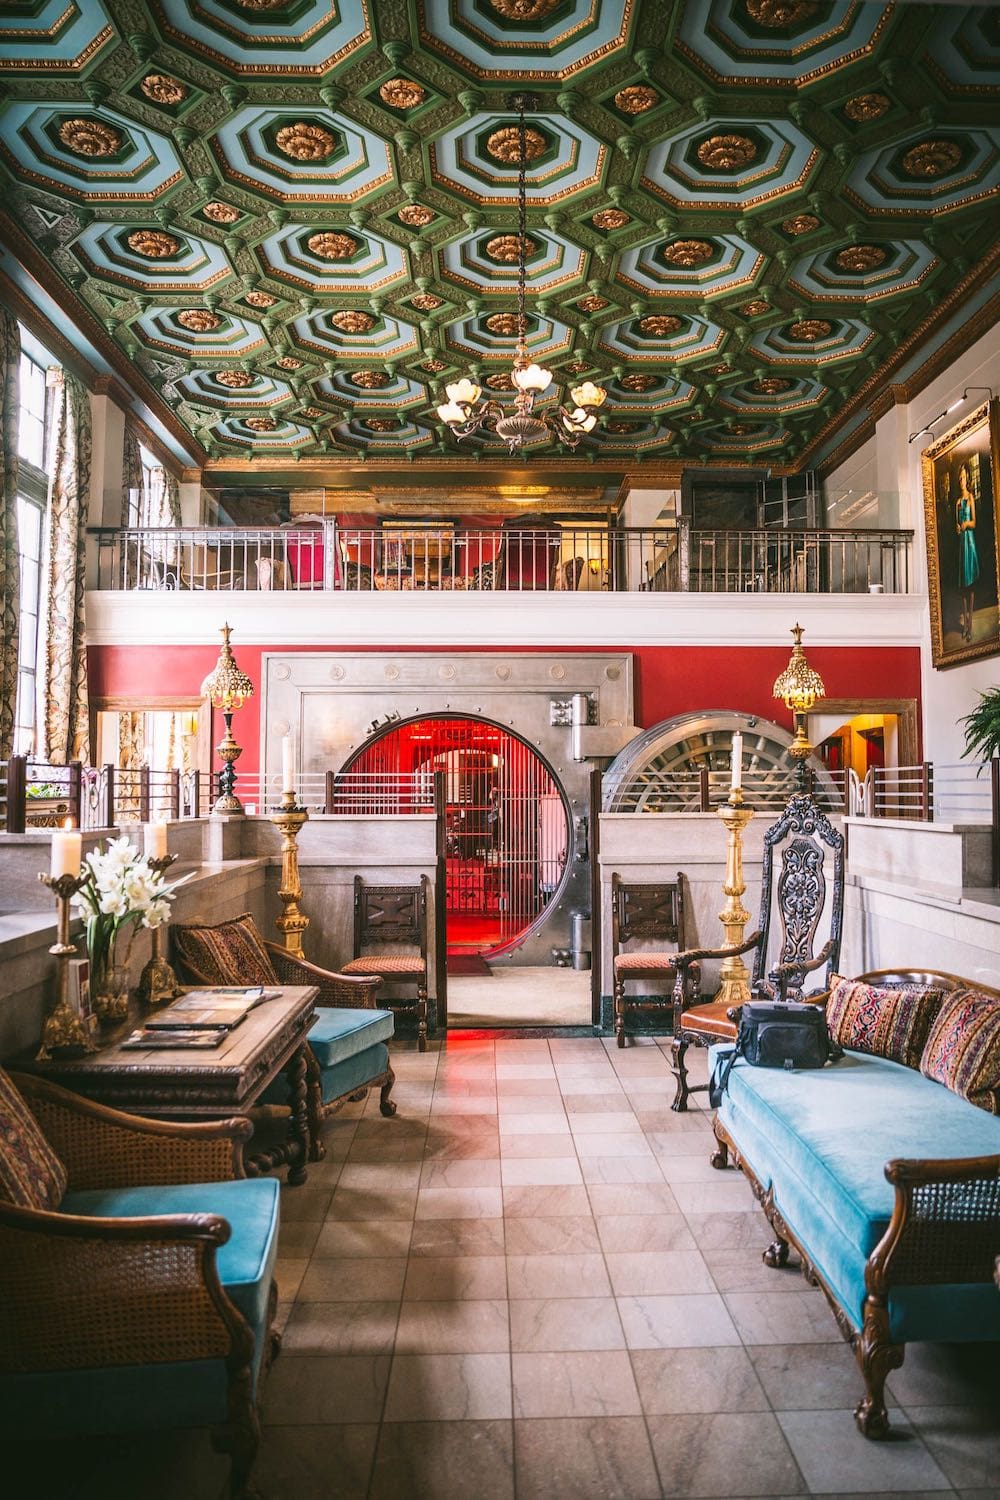 The grand interior of a hotel with ornate furniture and a converted bank vault